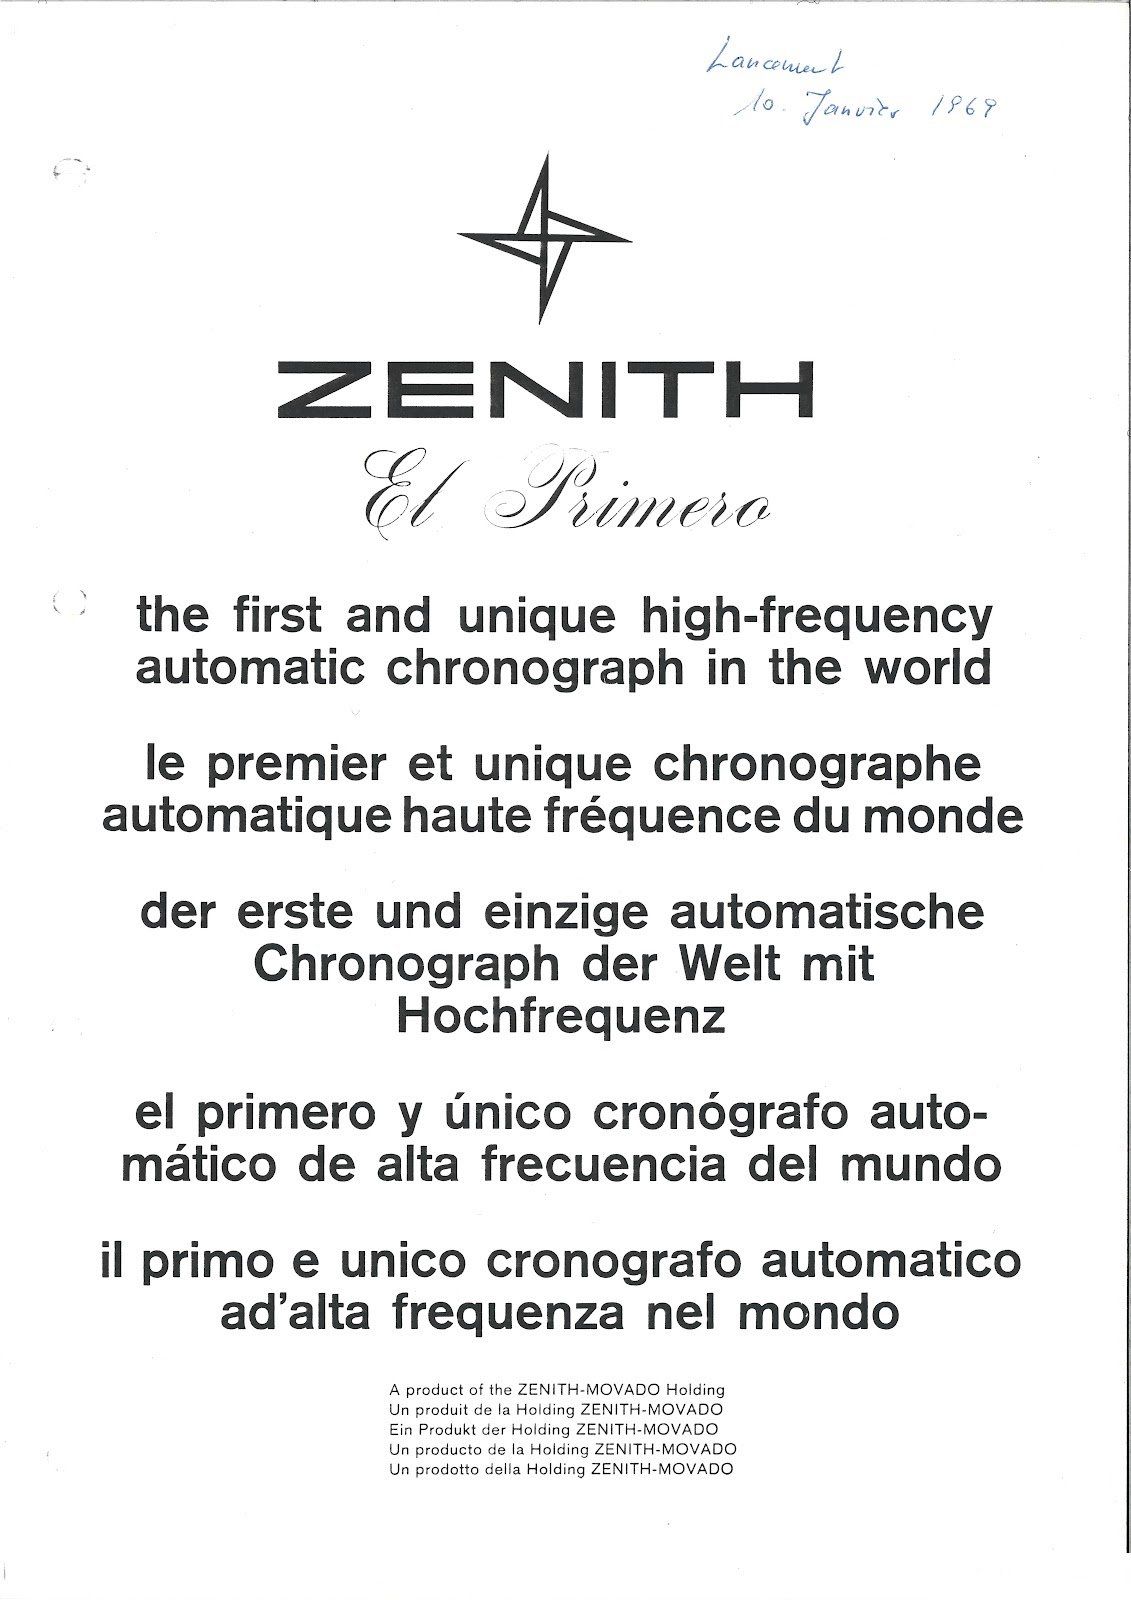 The first and unique press release of the Zenith El Primero from 1969